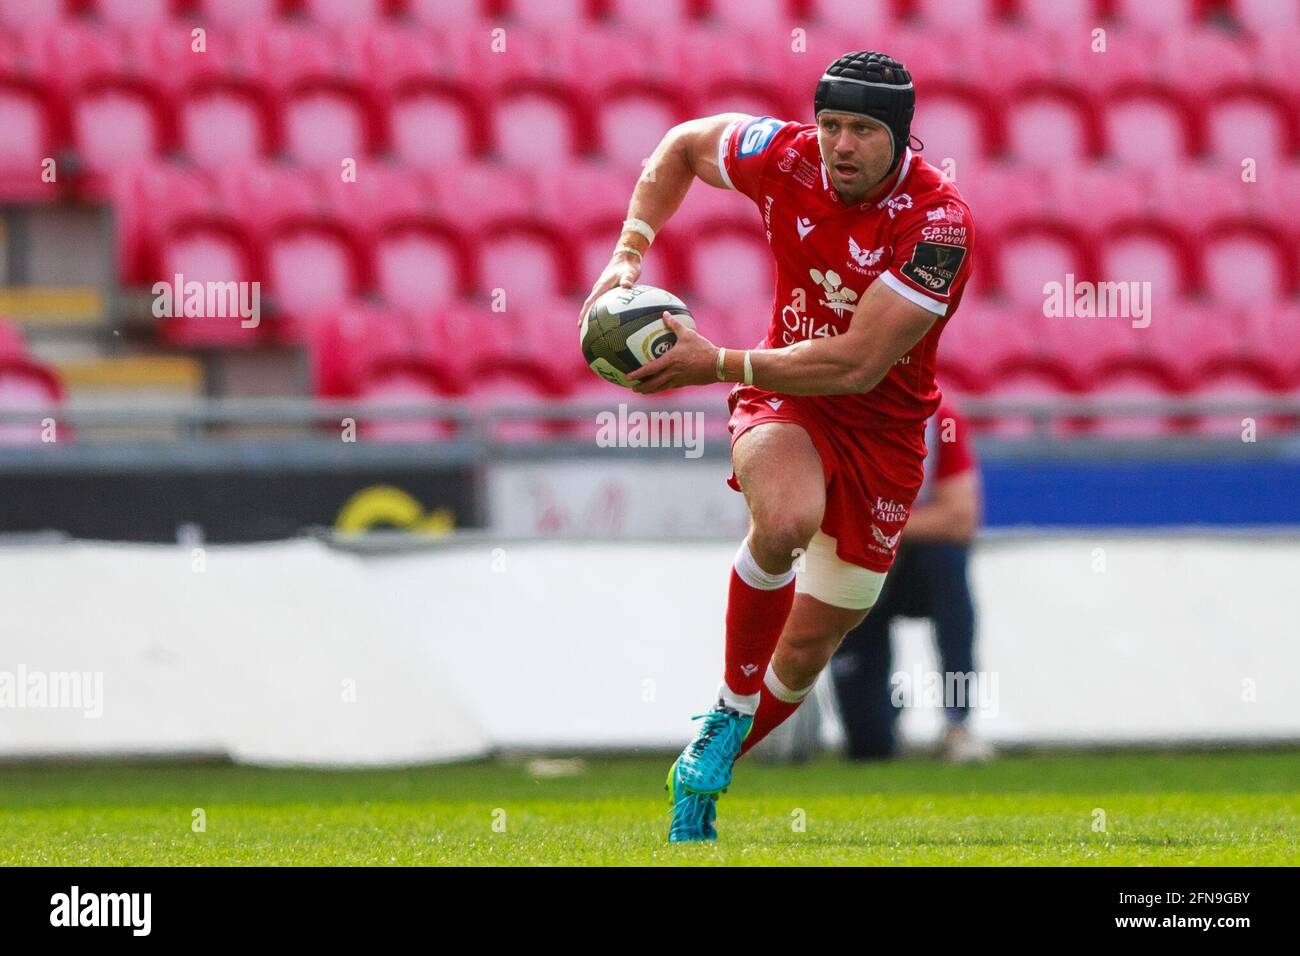 Llanelli, UK. 15 May, 2021. Scarlets fullback Leigh Halfpenny counterattacks during the Scarlets v Cardiff Blues PRO14 Rainbow Cup Rugby Match. Credit: Gruffydd Thomas/Alamy Live News Stock Photo